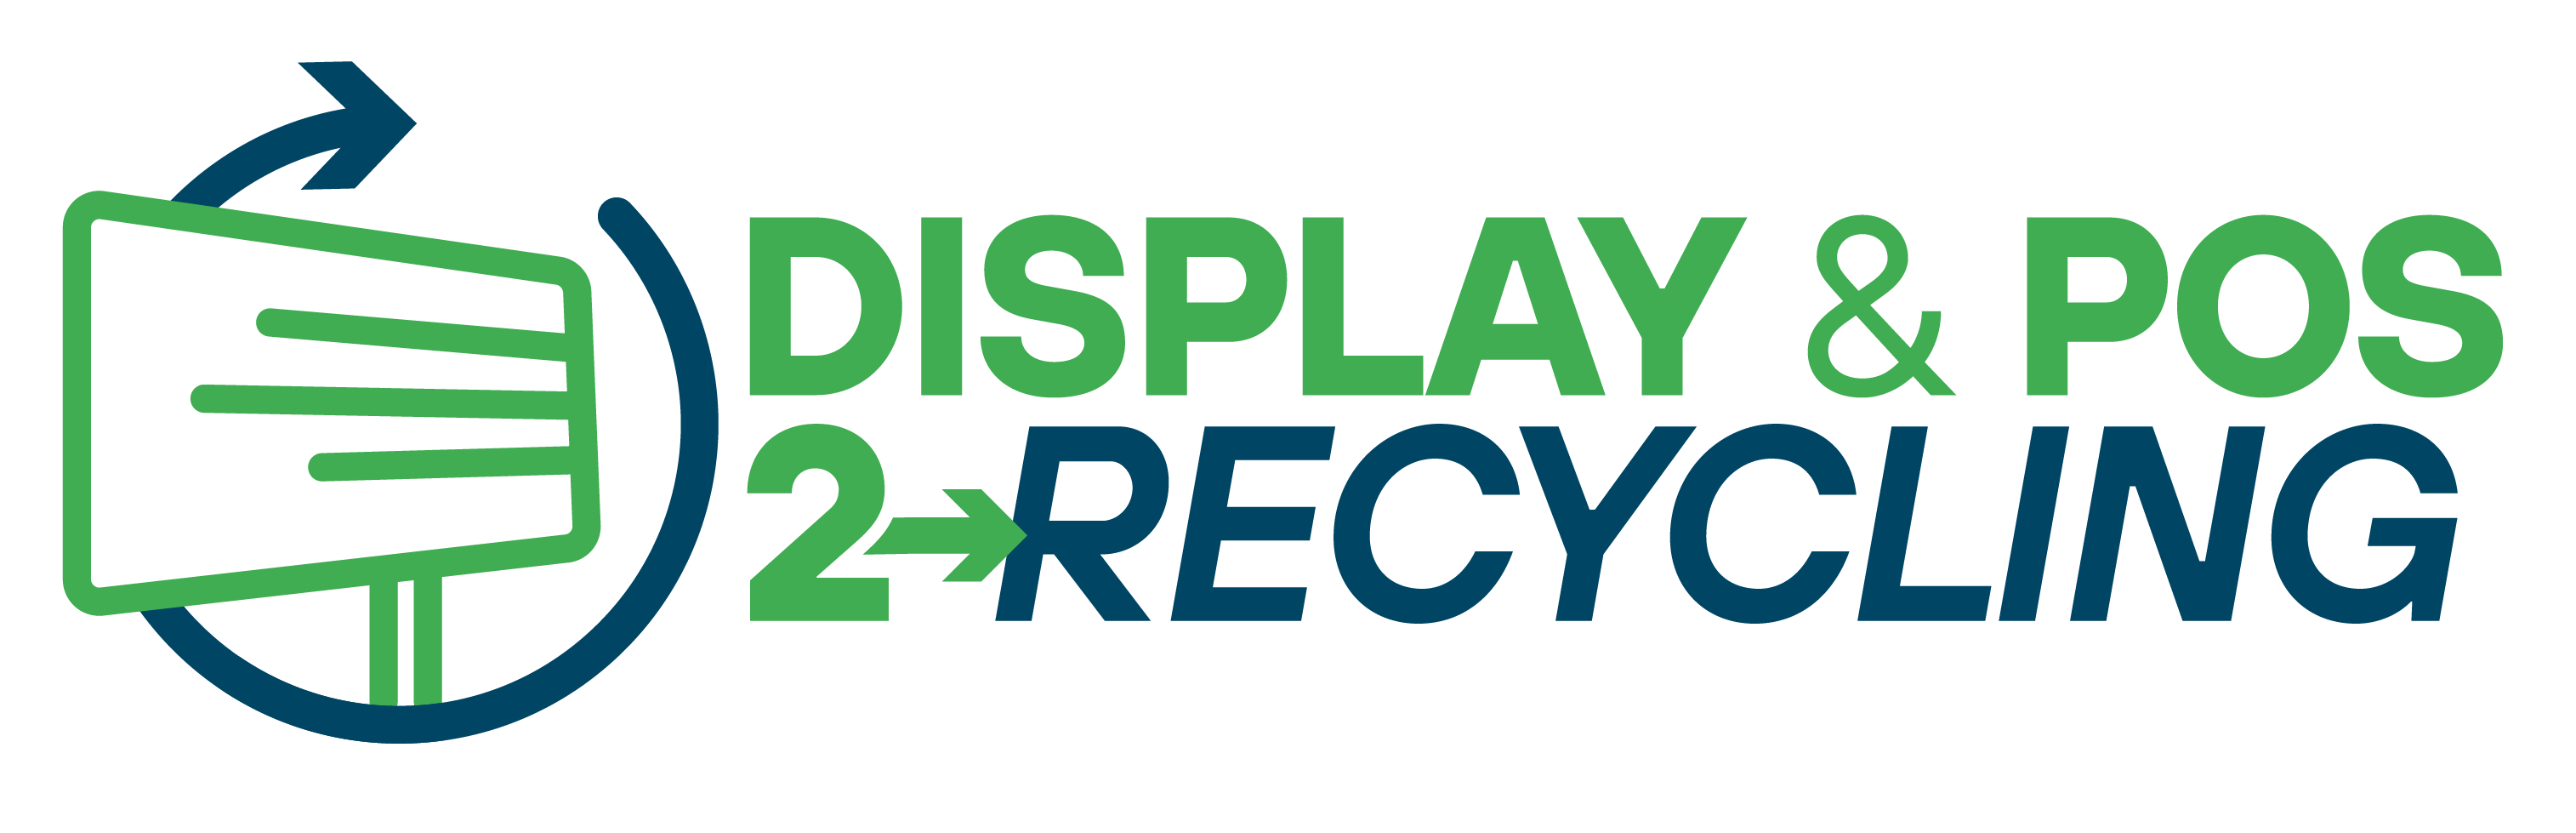 BPIF Display and POS 2 Recycling Scheme